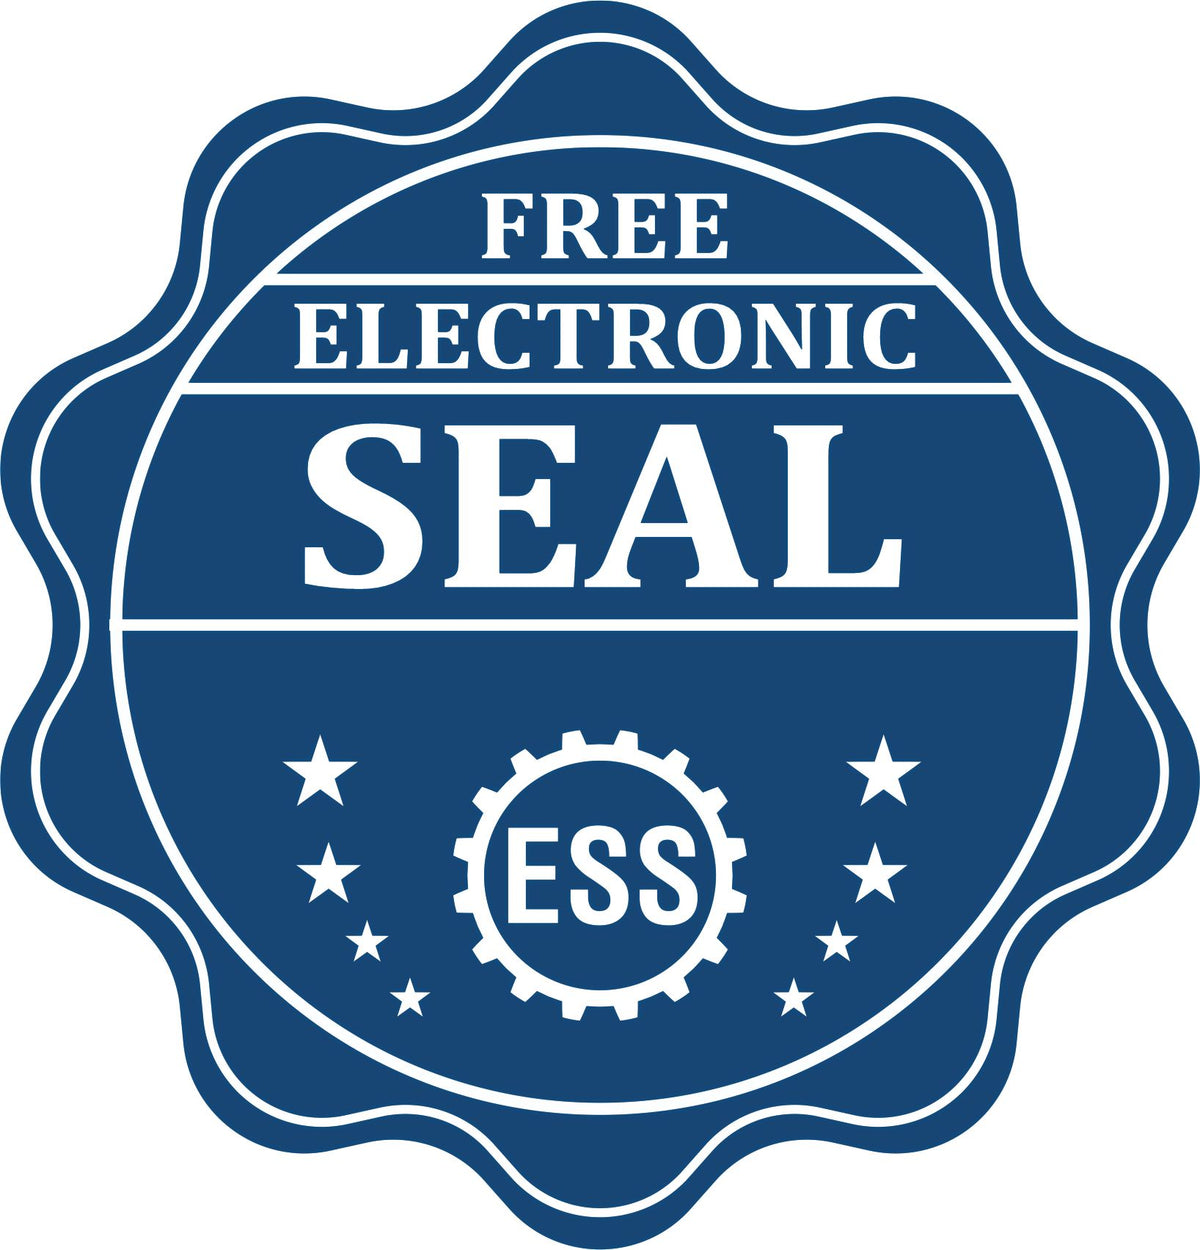 A badge showing a free electronic seal for the Extended Long Reach Arizona Surveyor Embosser with stars and the ESS gear on the emblem.